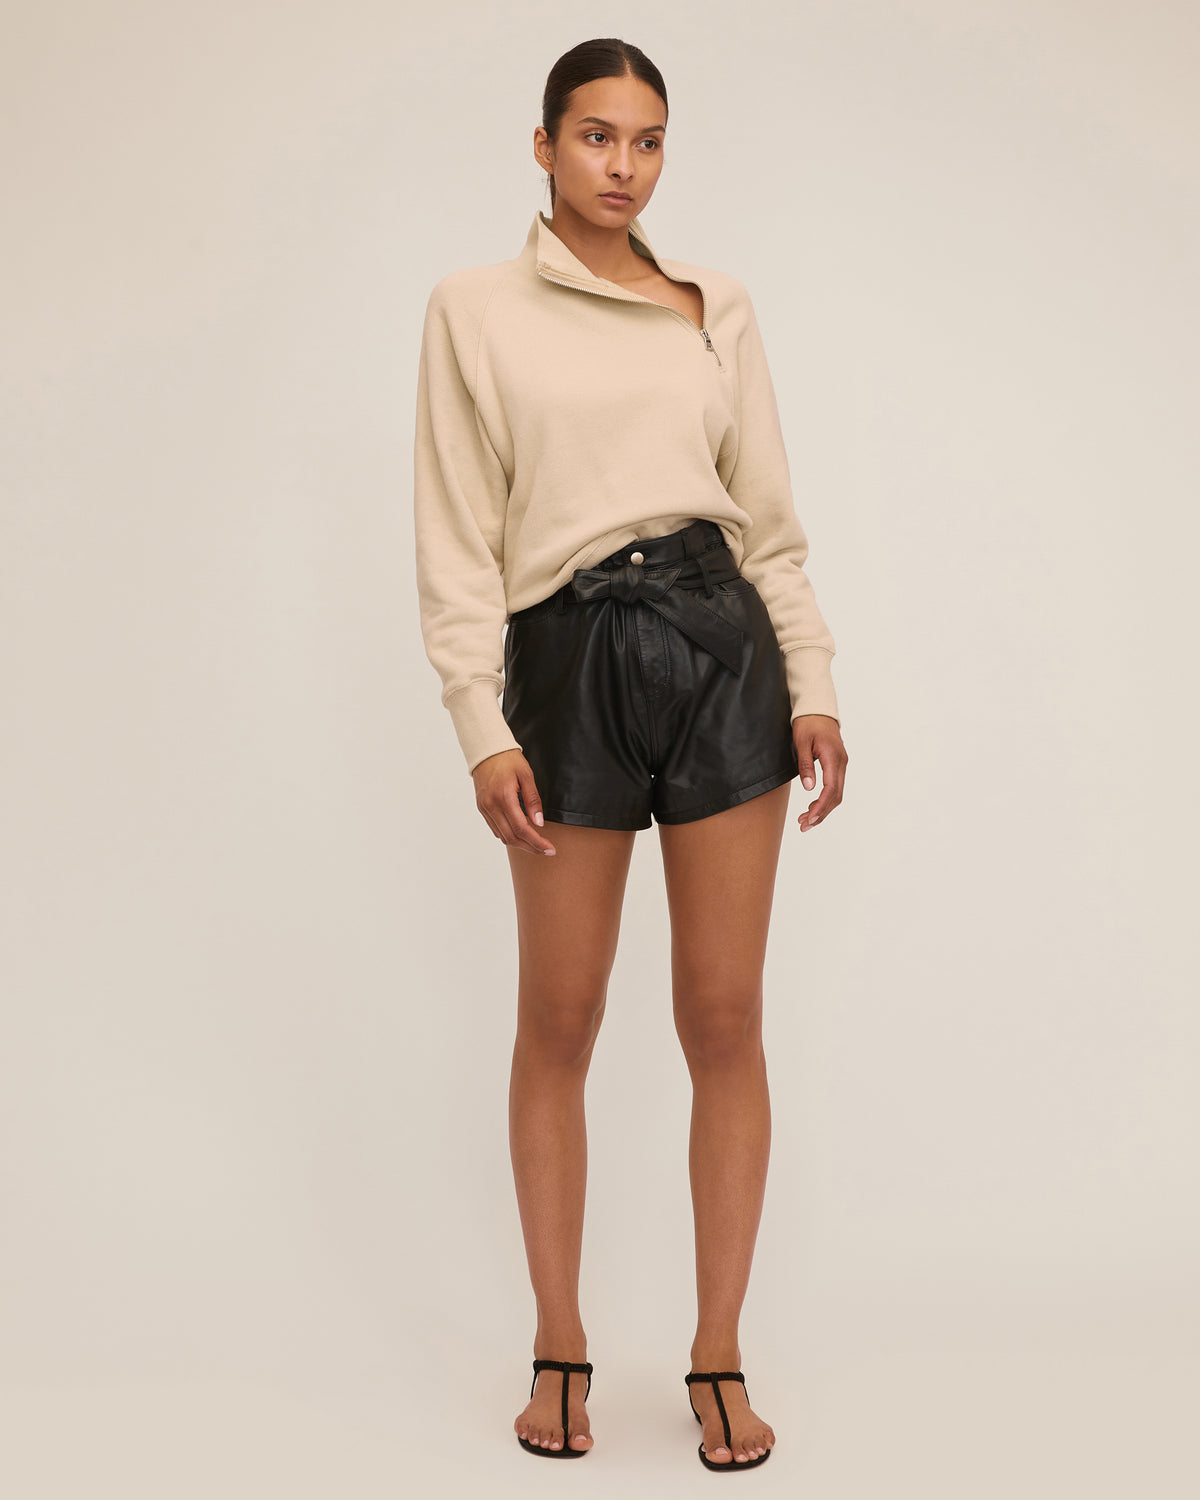 So Uptight French Terry Funnel Neck Zip Sweatshirt in Sand